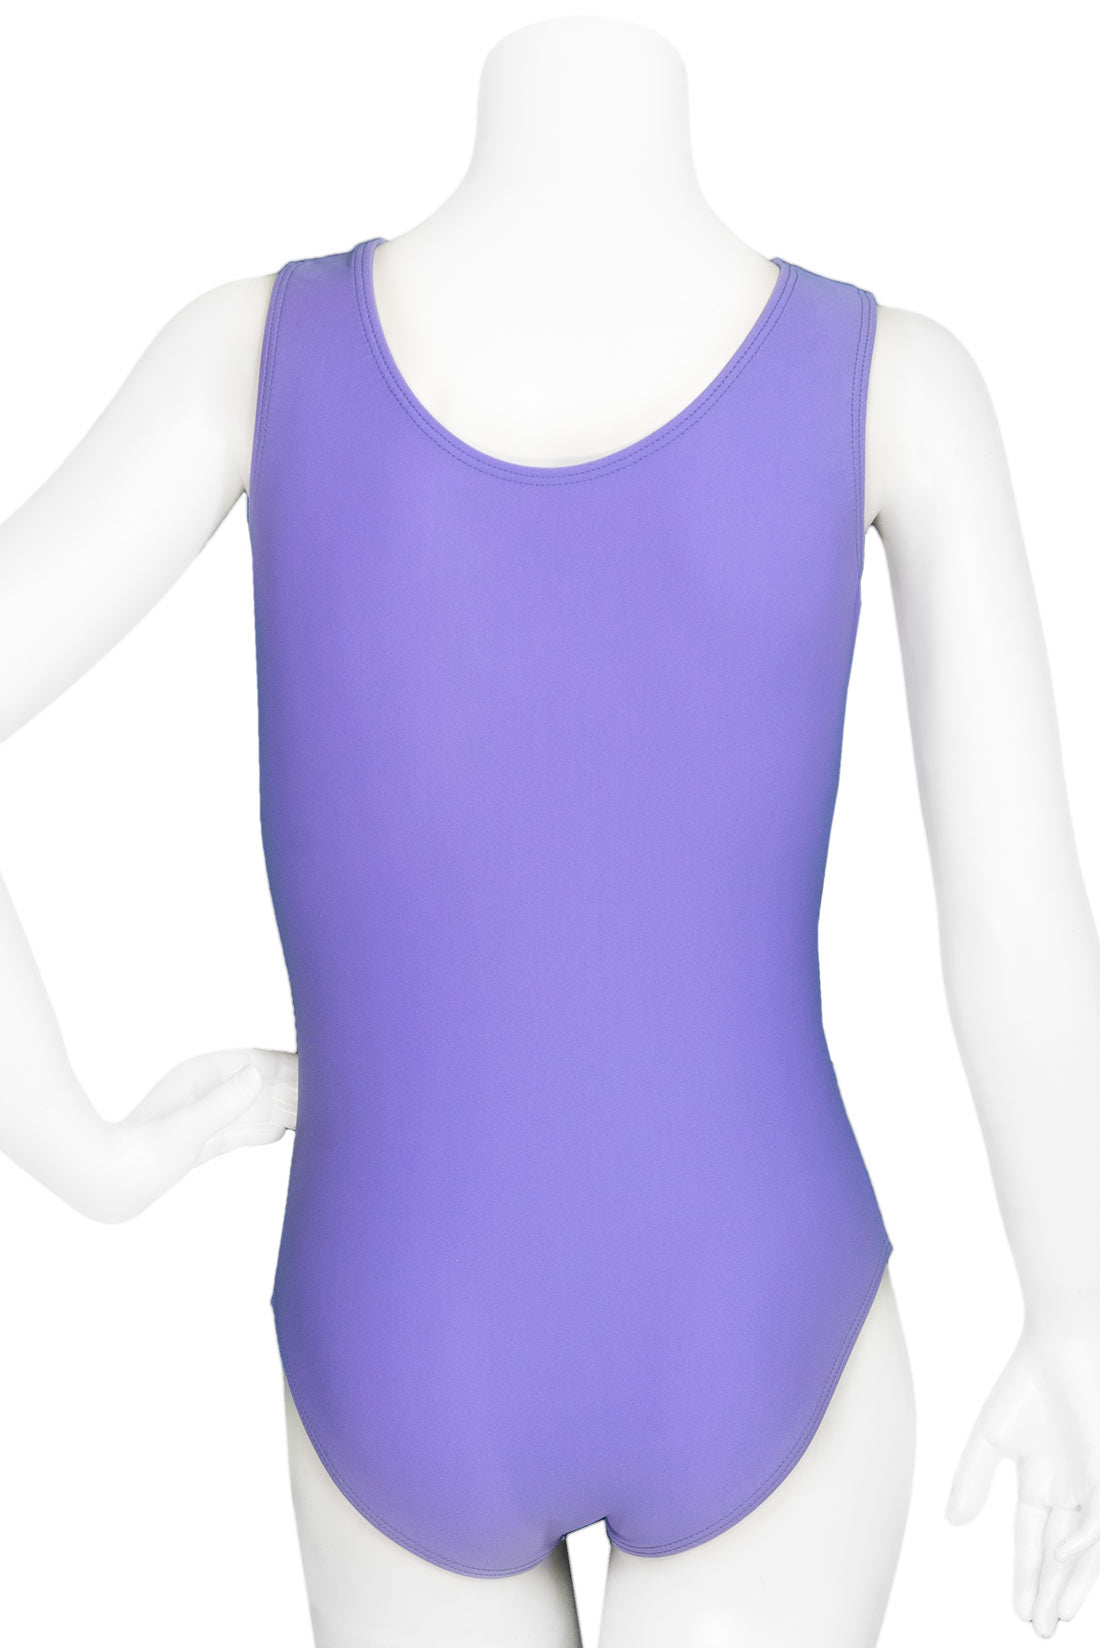 Leotard back made from ultra-soft, comfortable lilac purple fabric by Destira, 2023